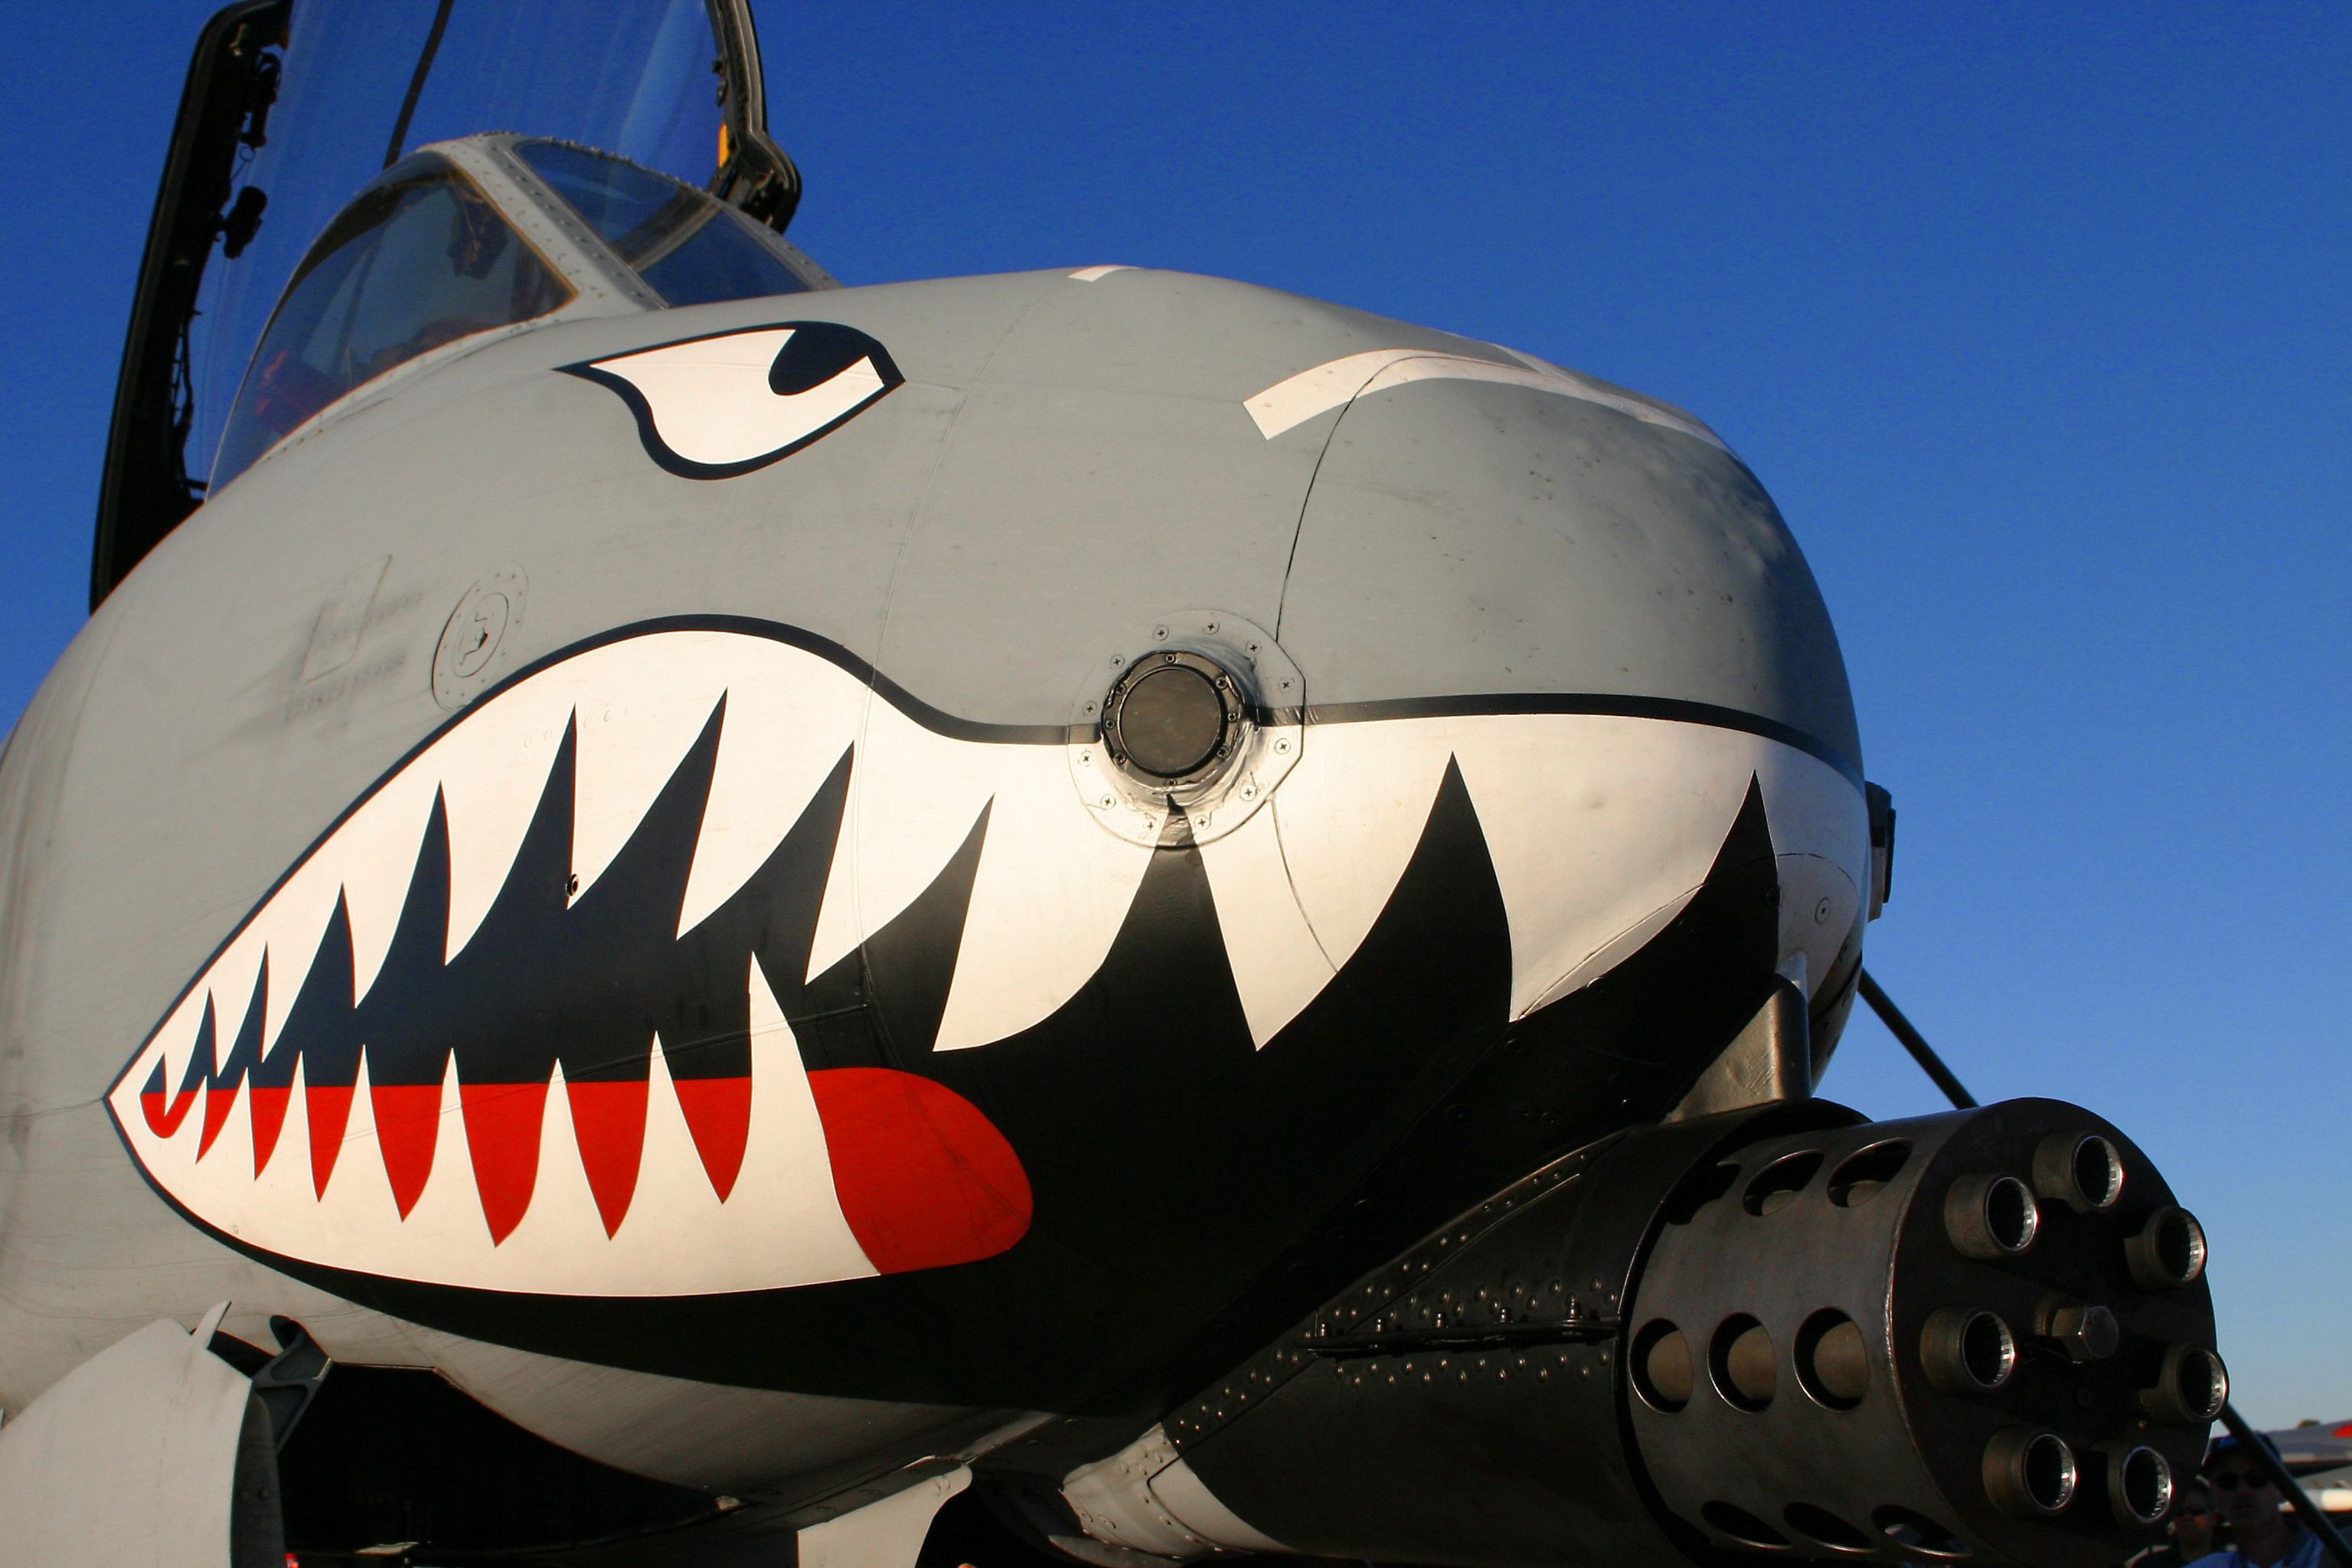 A-10 Warthog with the A-10 Warthog with the time-honored shark mouth decal shark mouth nose art